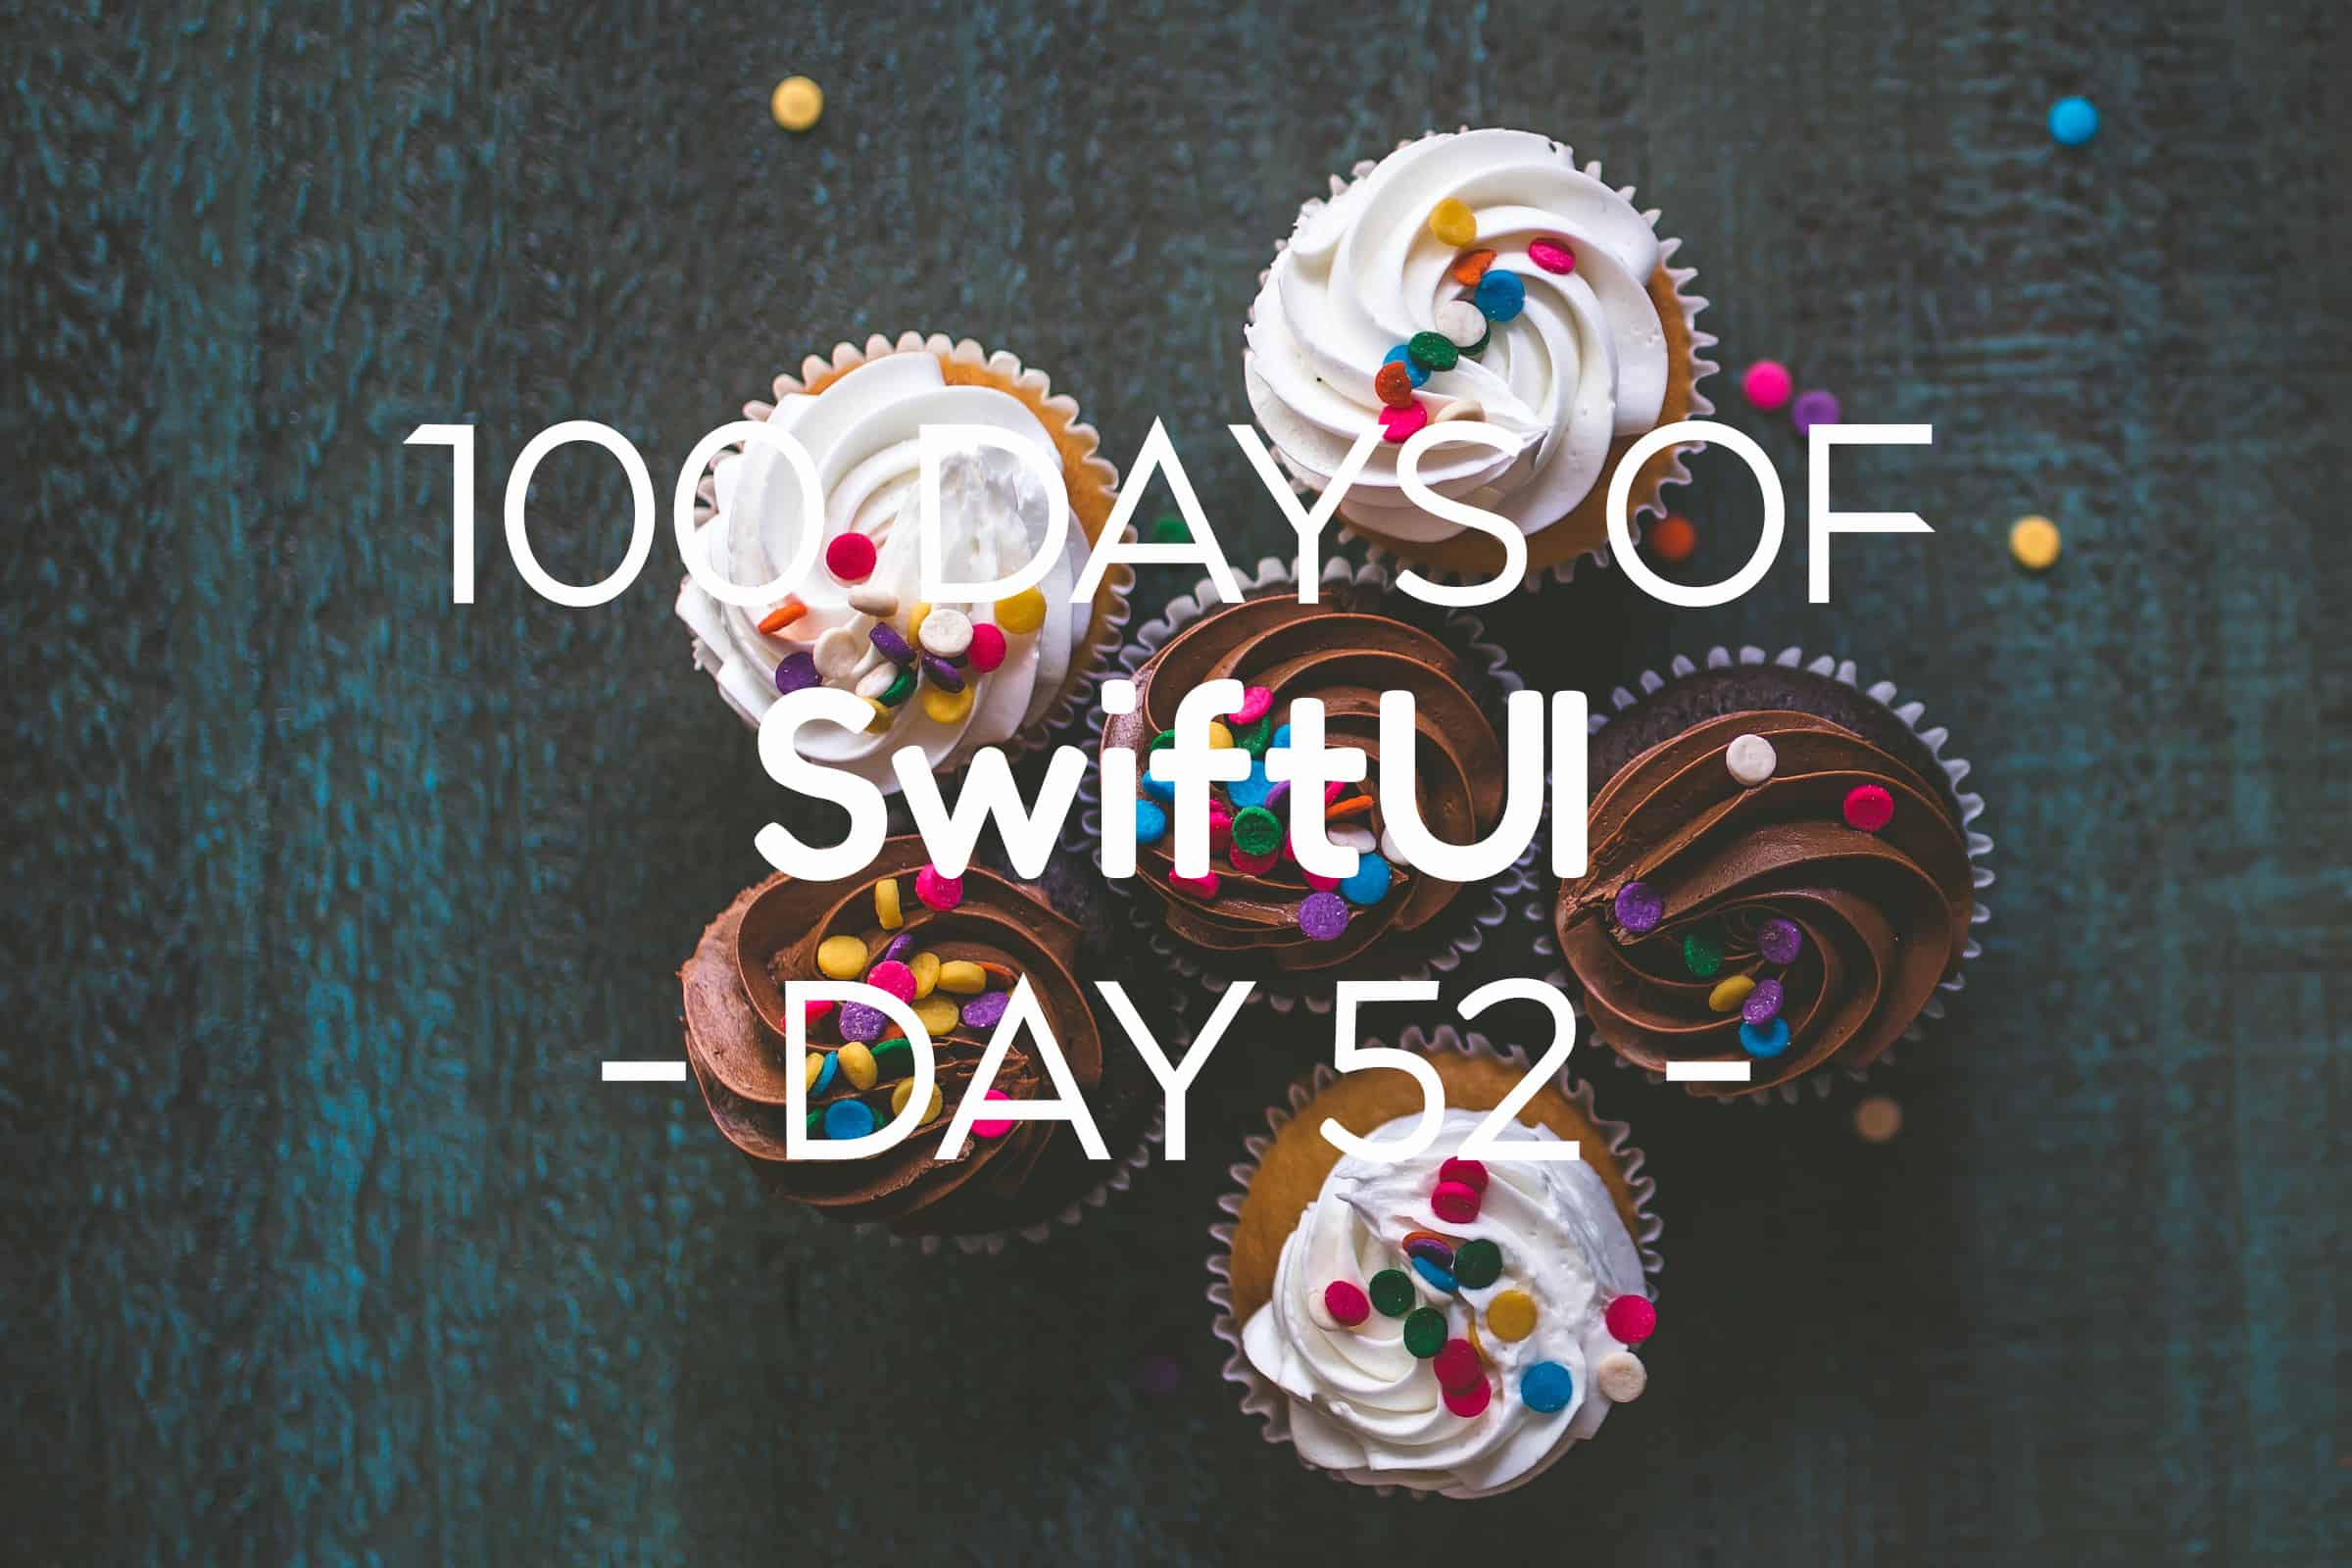 100 Days of SwiftUI Day 52